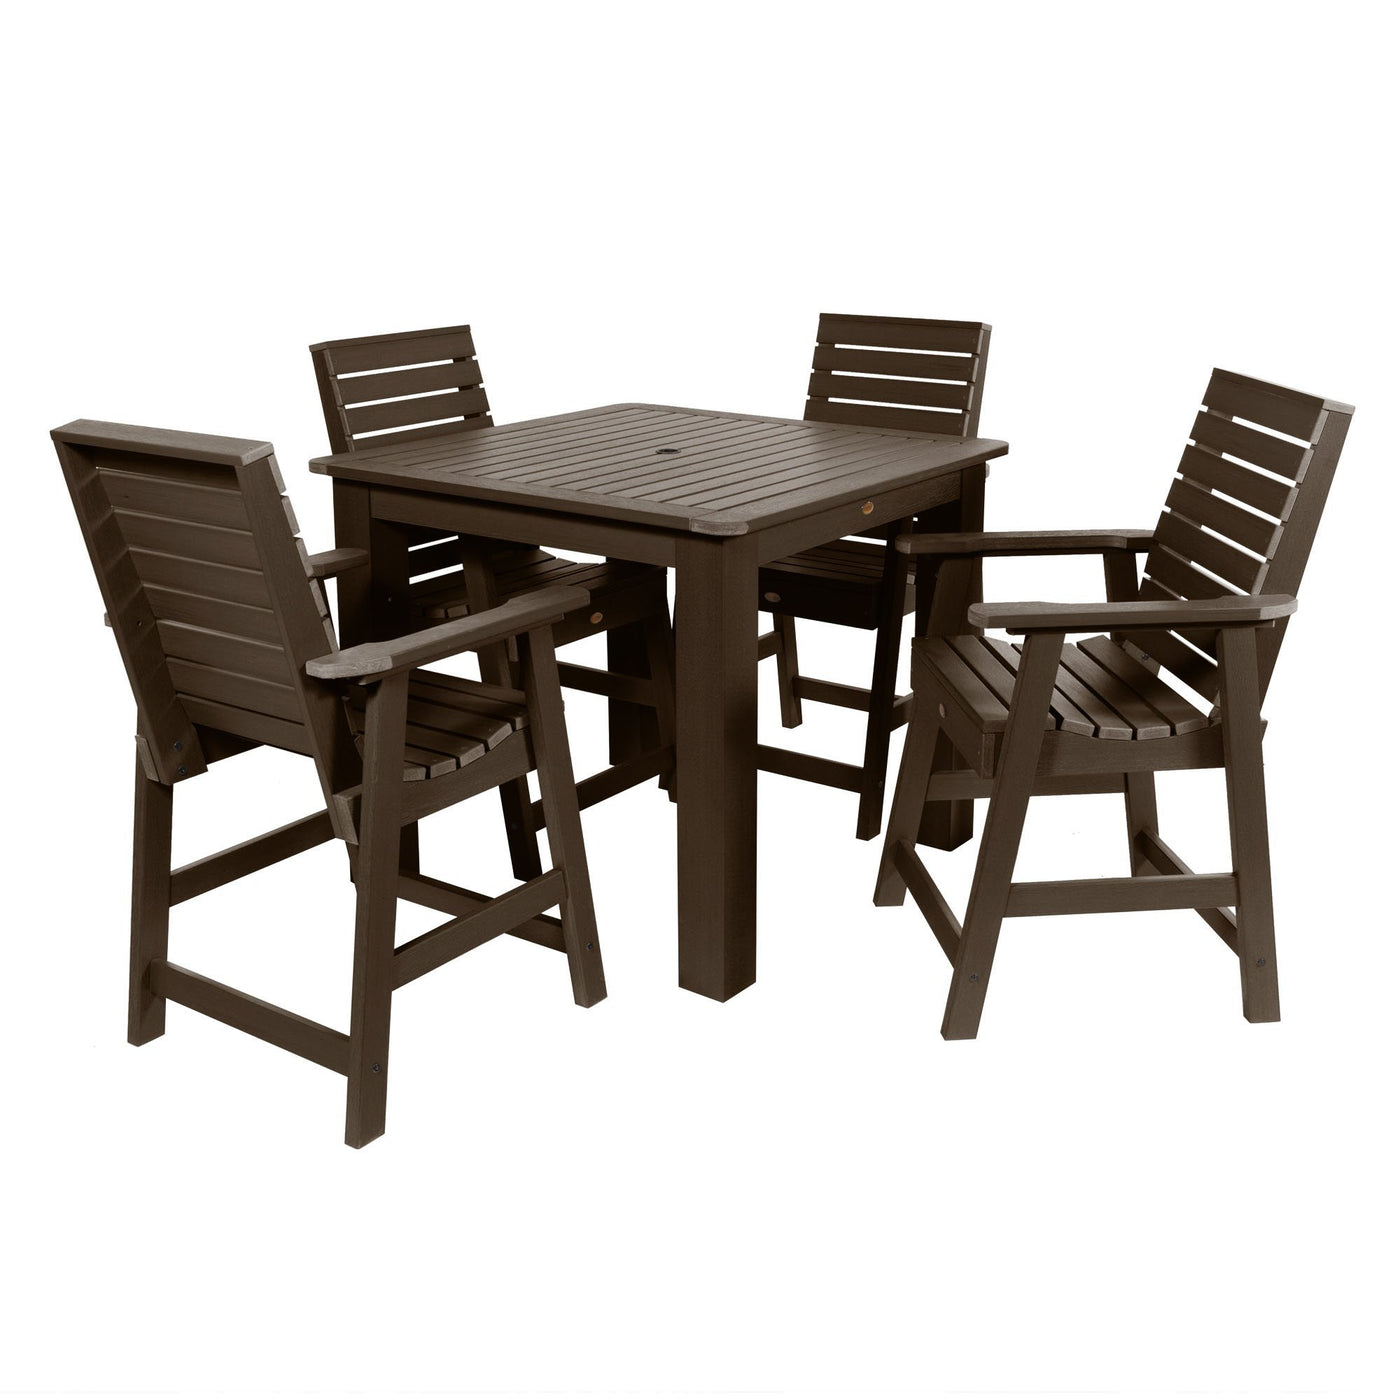 Weatherly 5pc Square Dining Set 42in x 42in- Counter Height Dining Highwood USA Weathered Acorn 